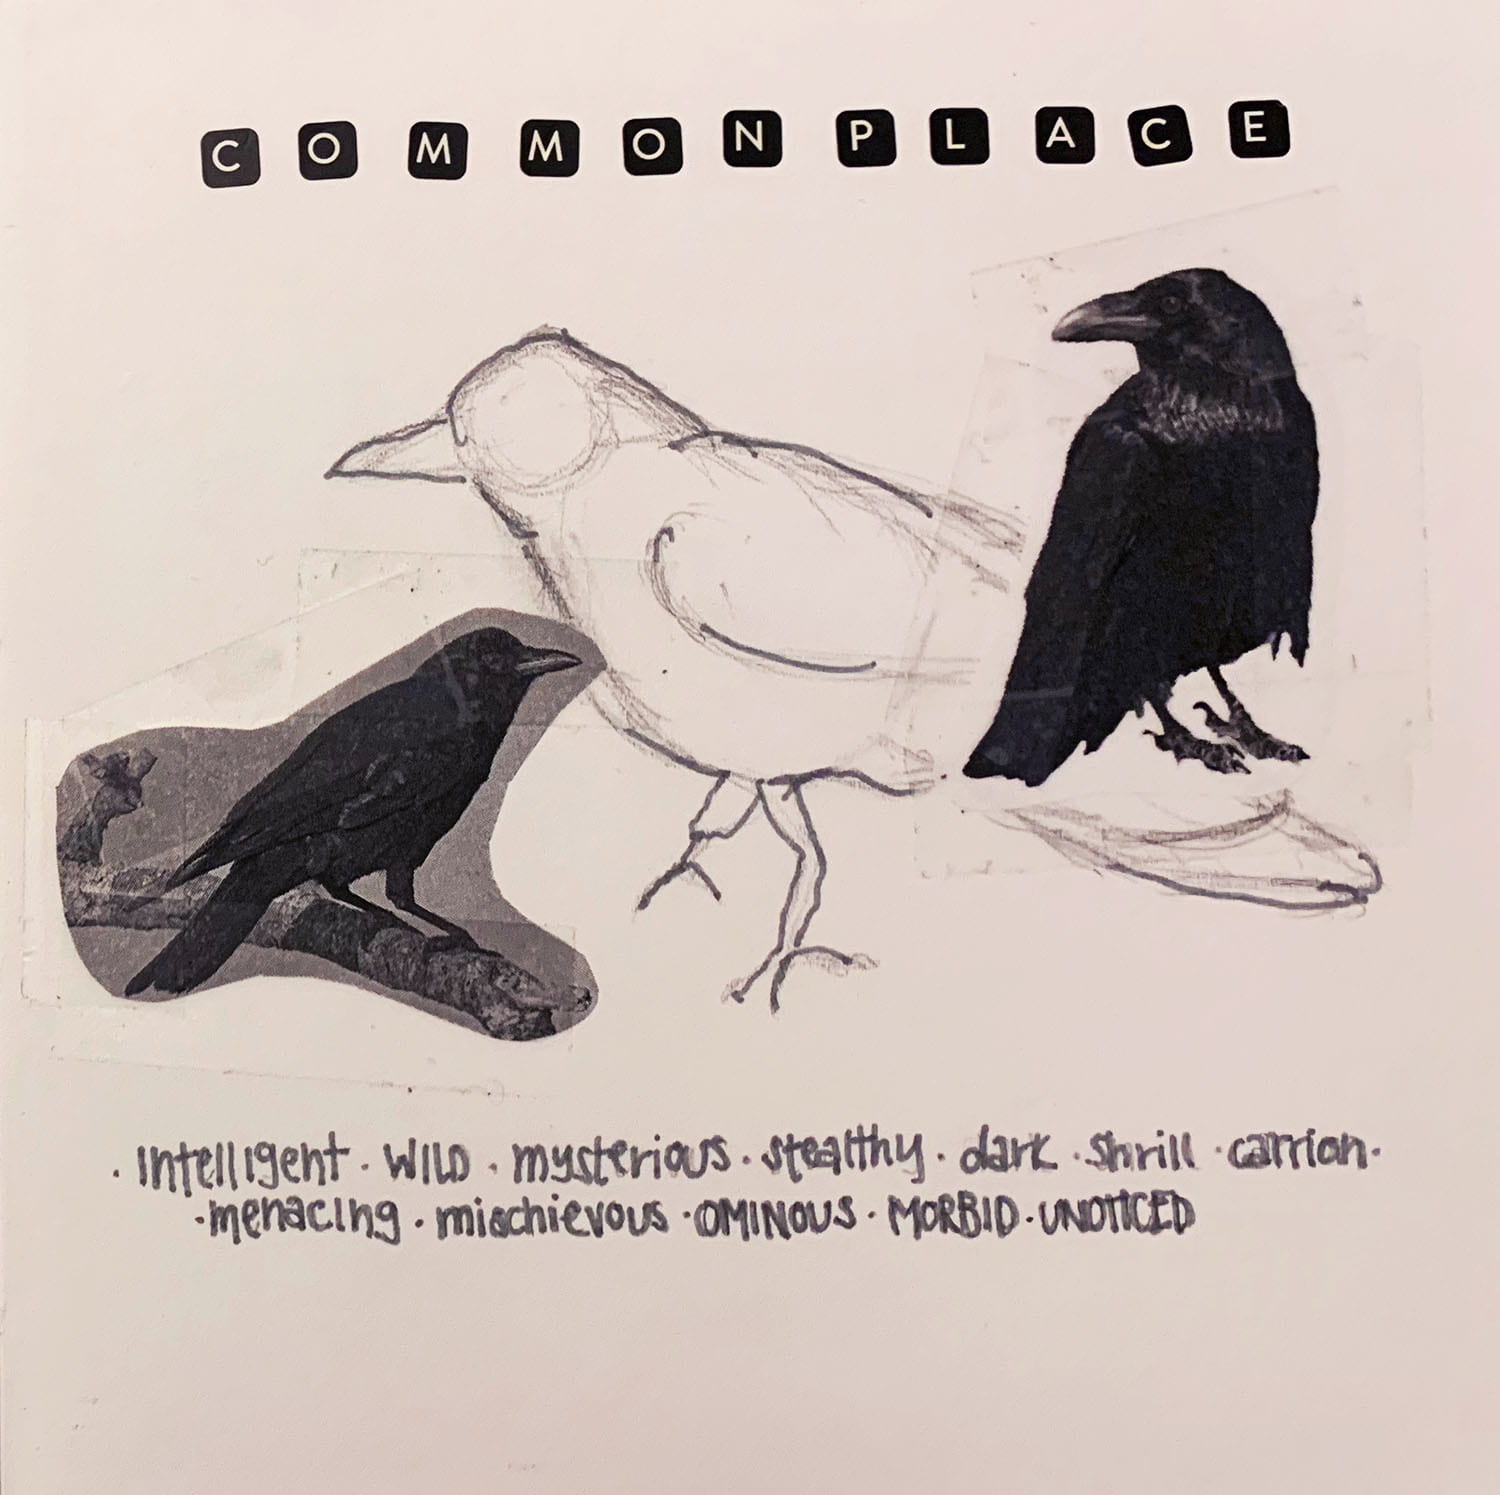 combined drawings and clipped photos of crows titled "commonplace" with text saying "intelligent, wild, mysterious, stealthy, dark, shrill, carrion, menacing, mischievous, ominous, morbid, unoticed"